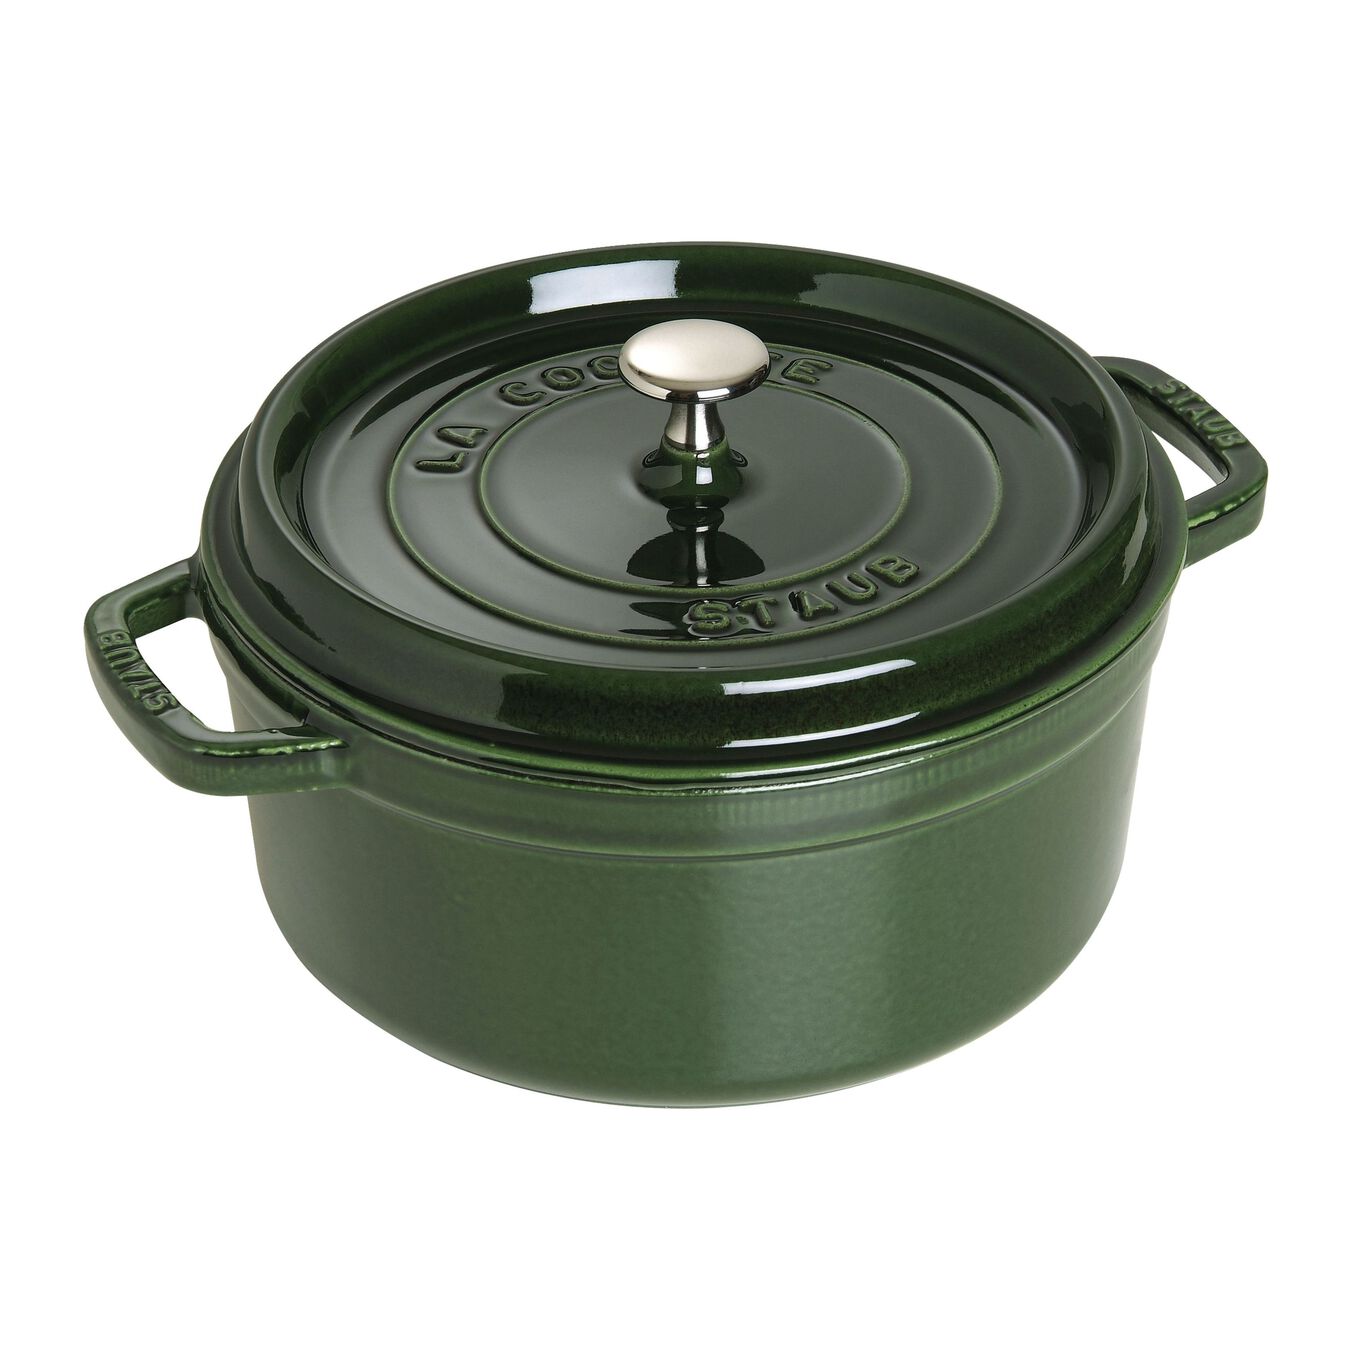 5.25 l cast iron round Cocotte, basil-green - Visual Imperfections,,large 1